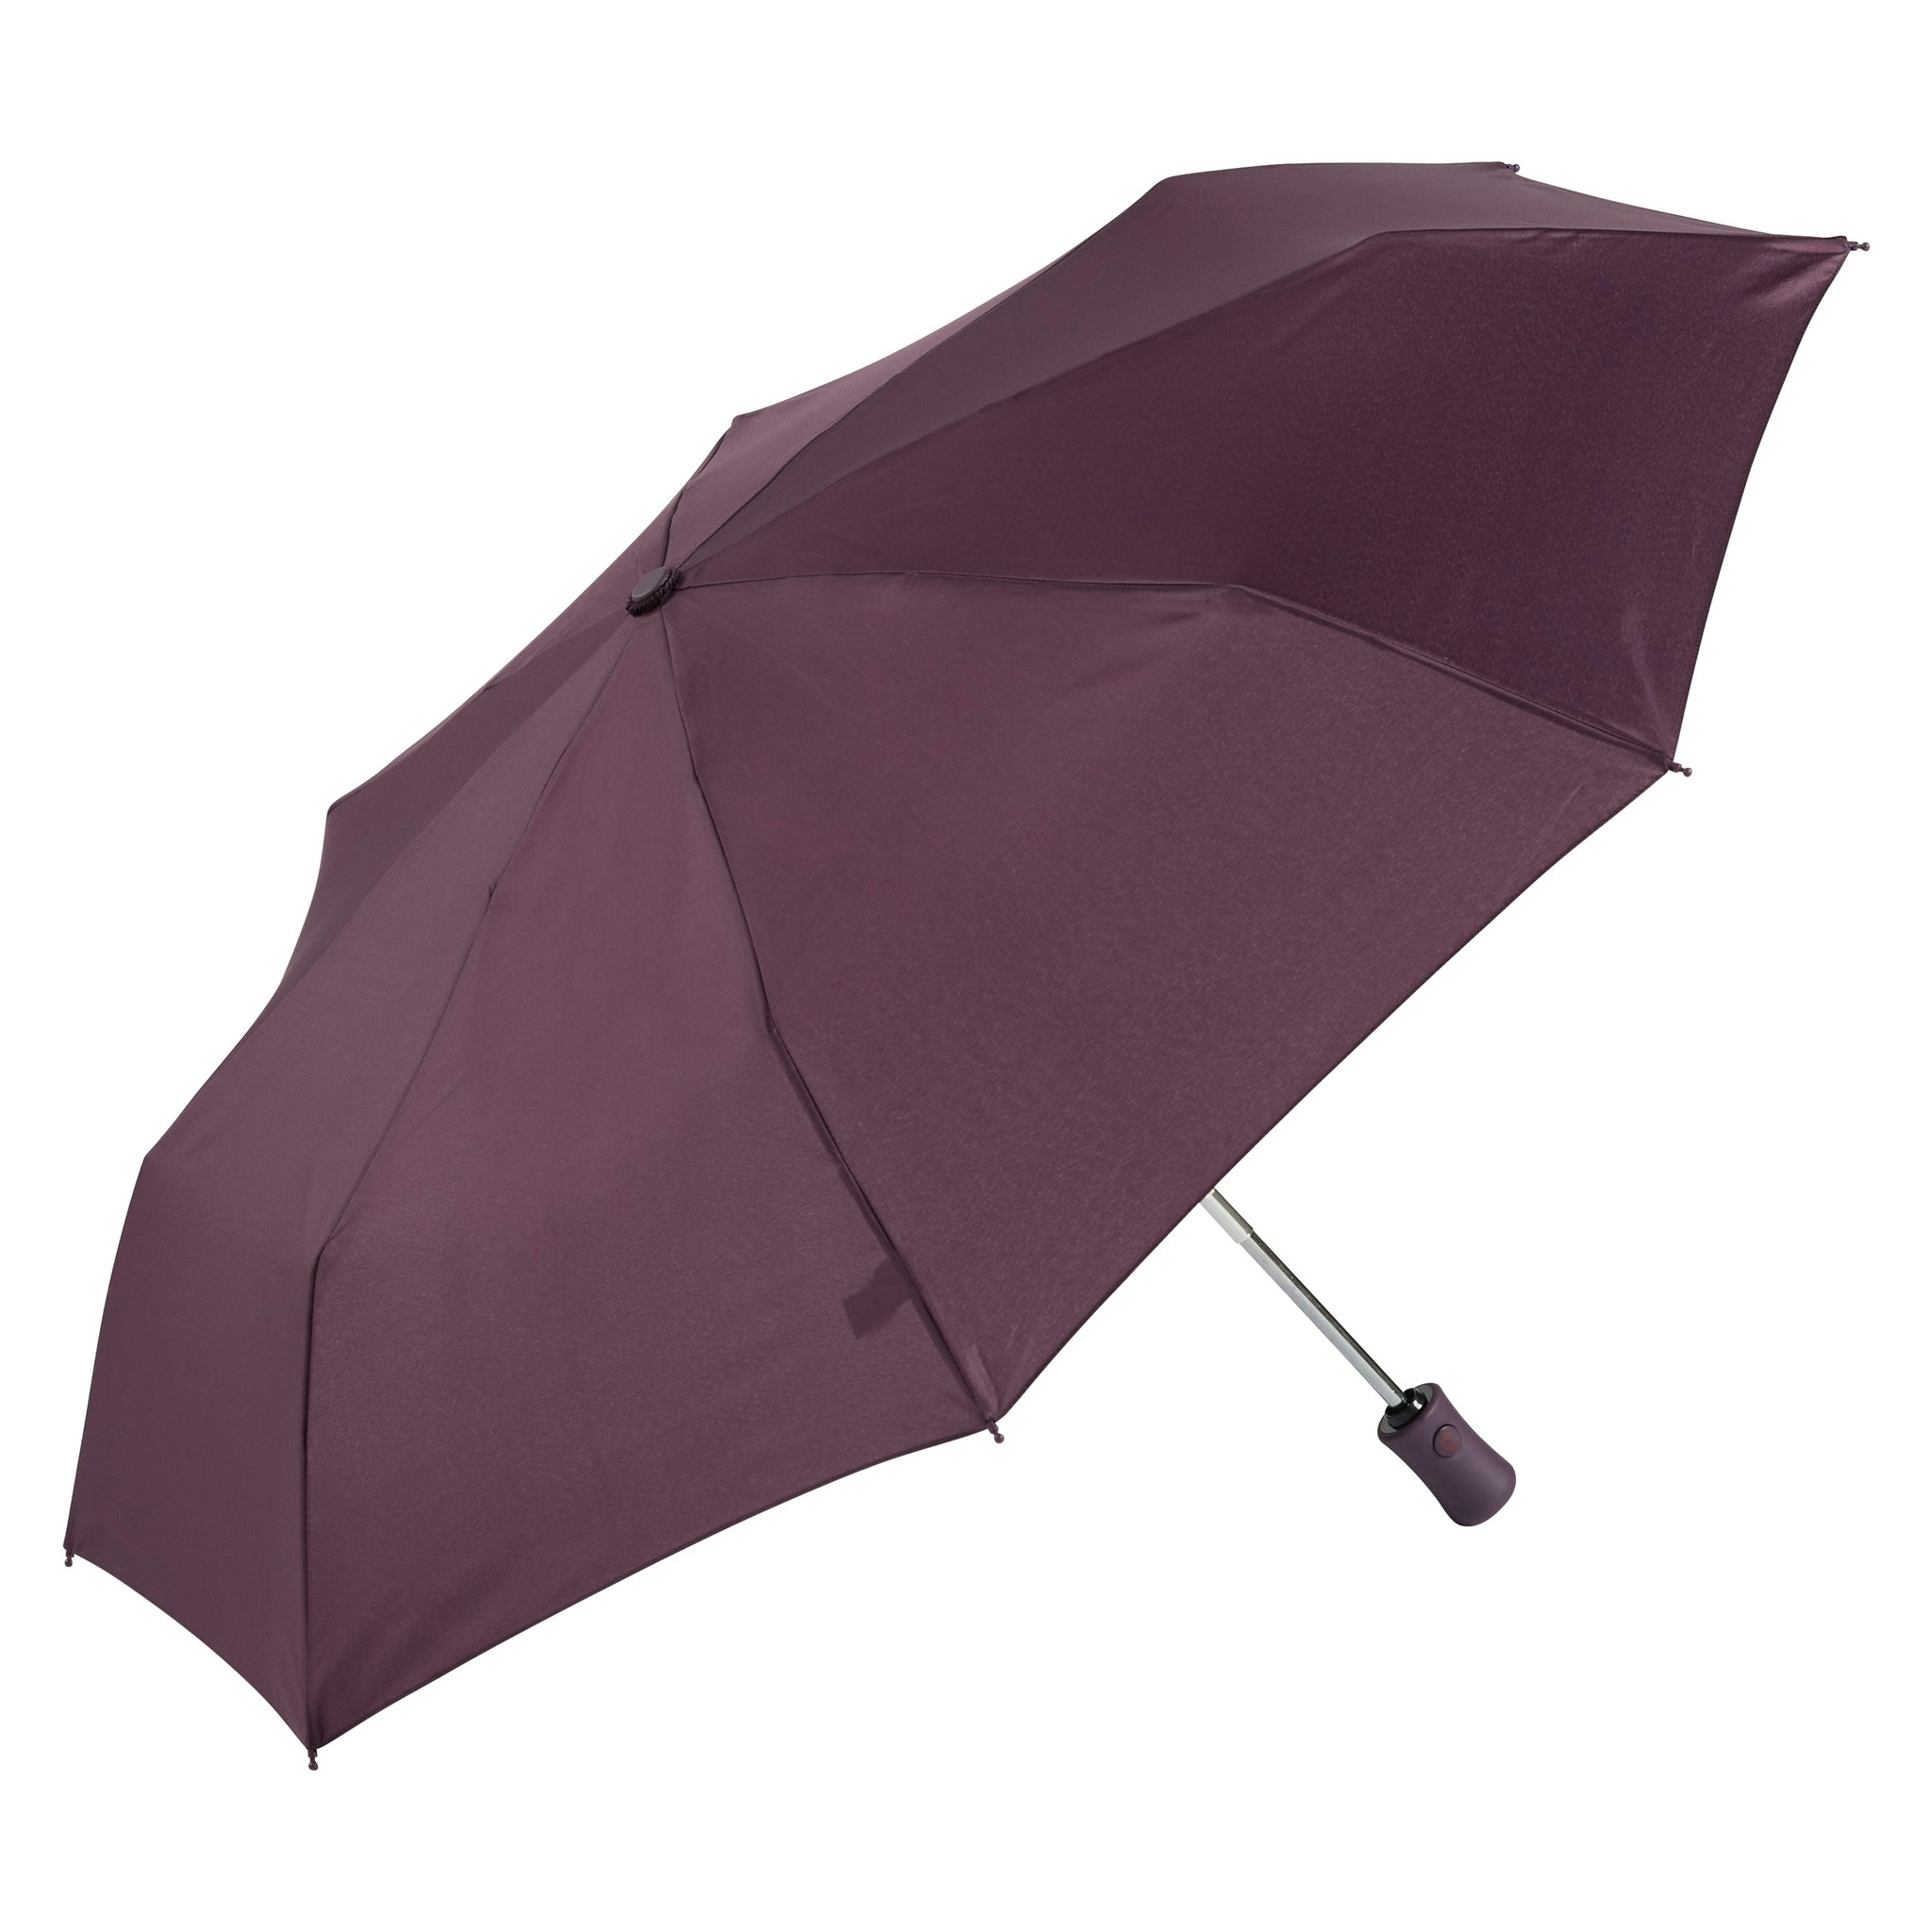 Umbrella #10007 Best selling with auto open-close function - MAD RAIN